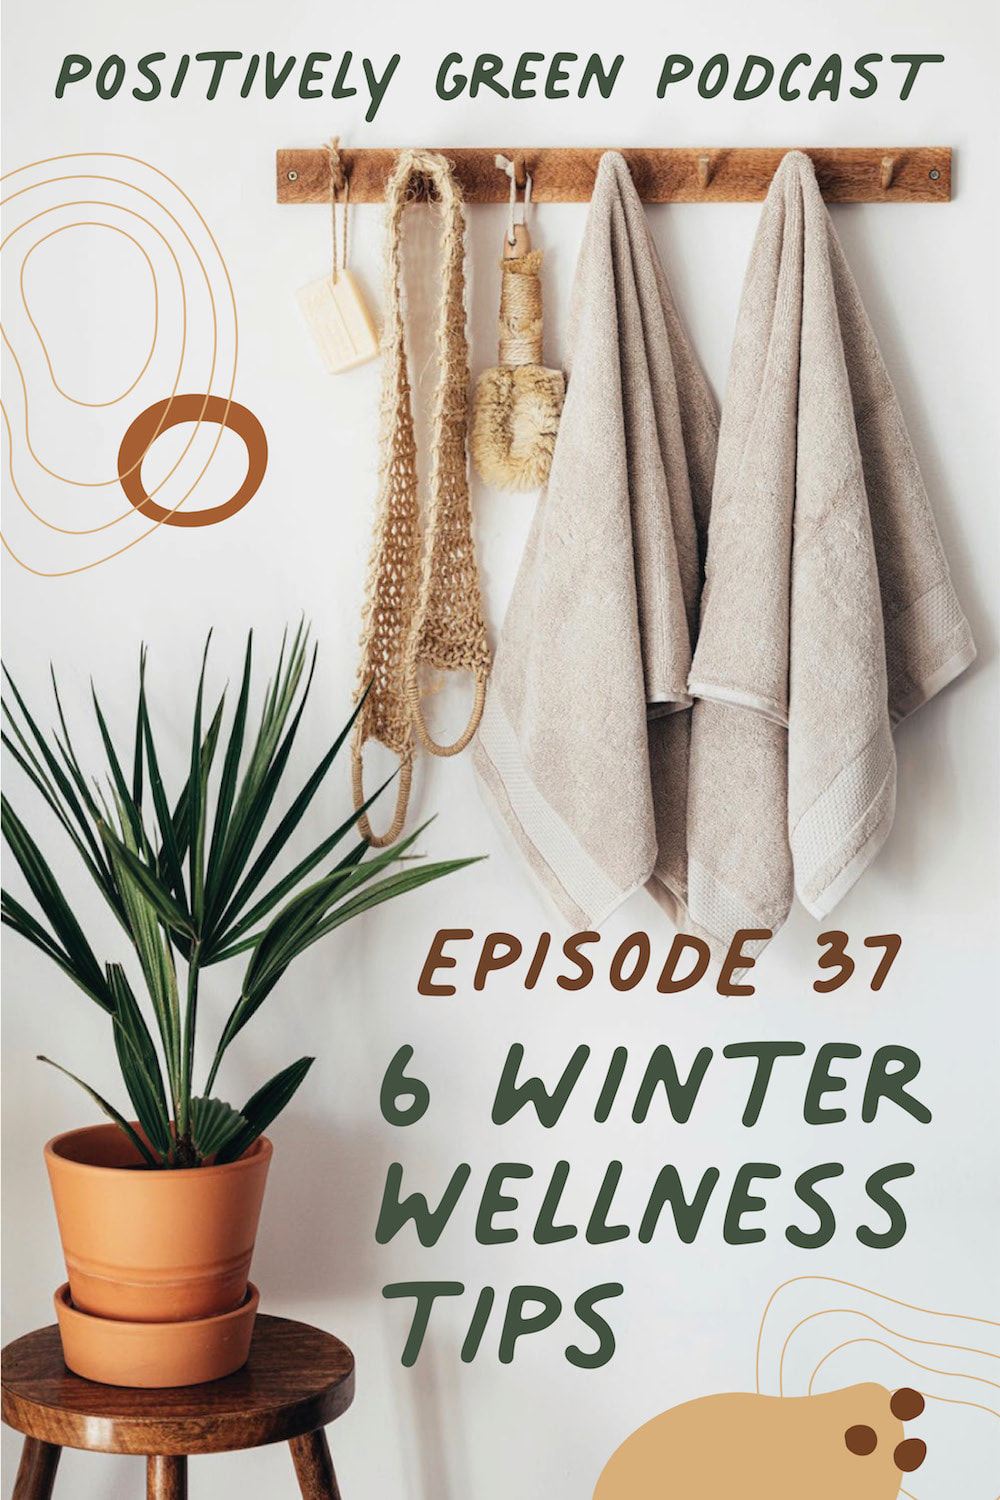 The Positively Green Podcast Episode 37: 6 Winter Wellness Tips